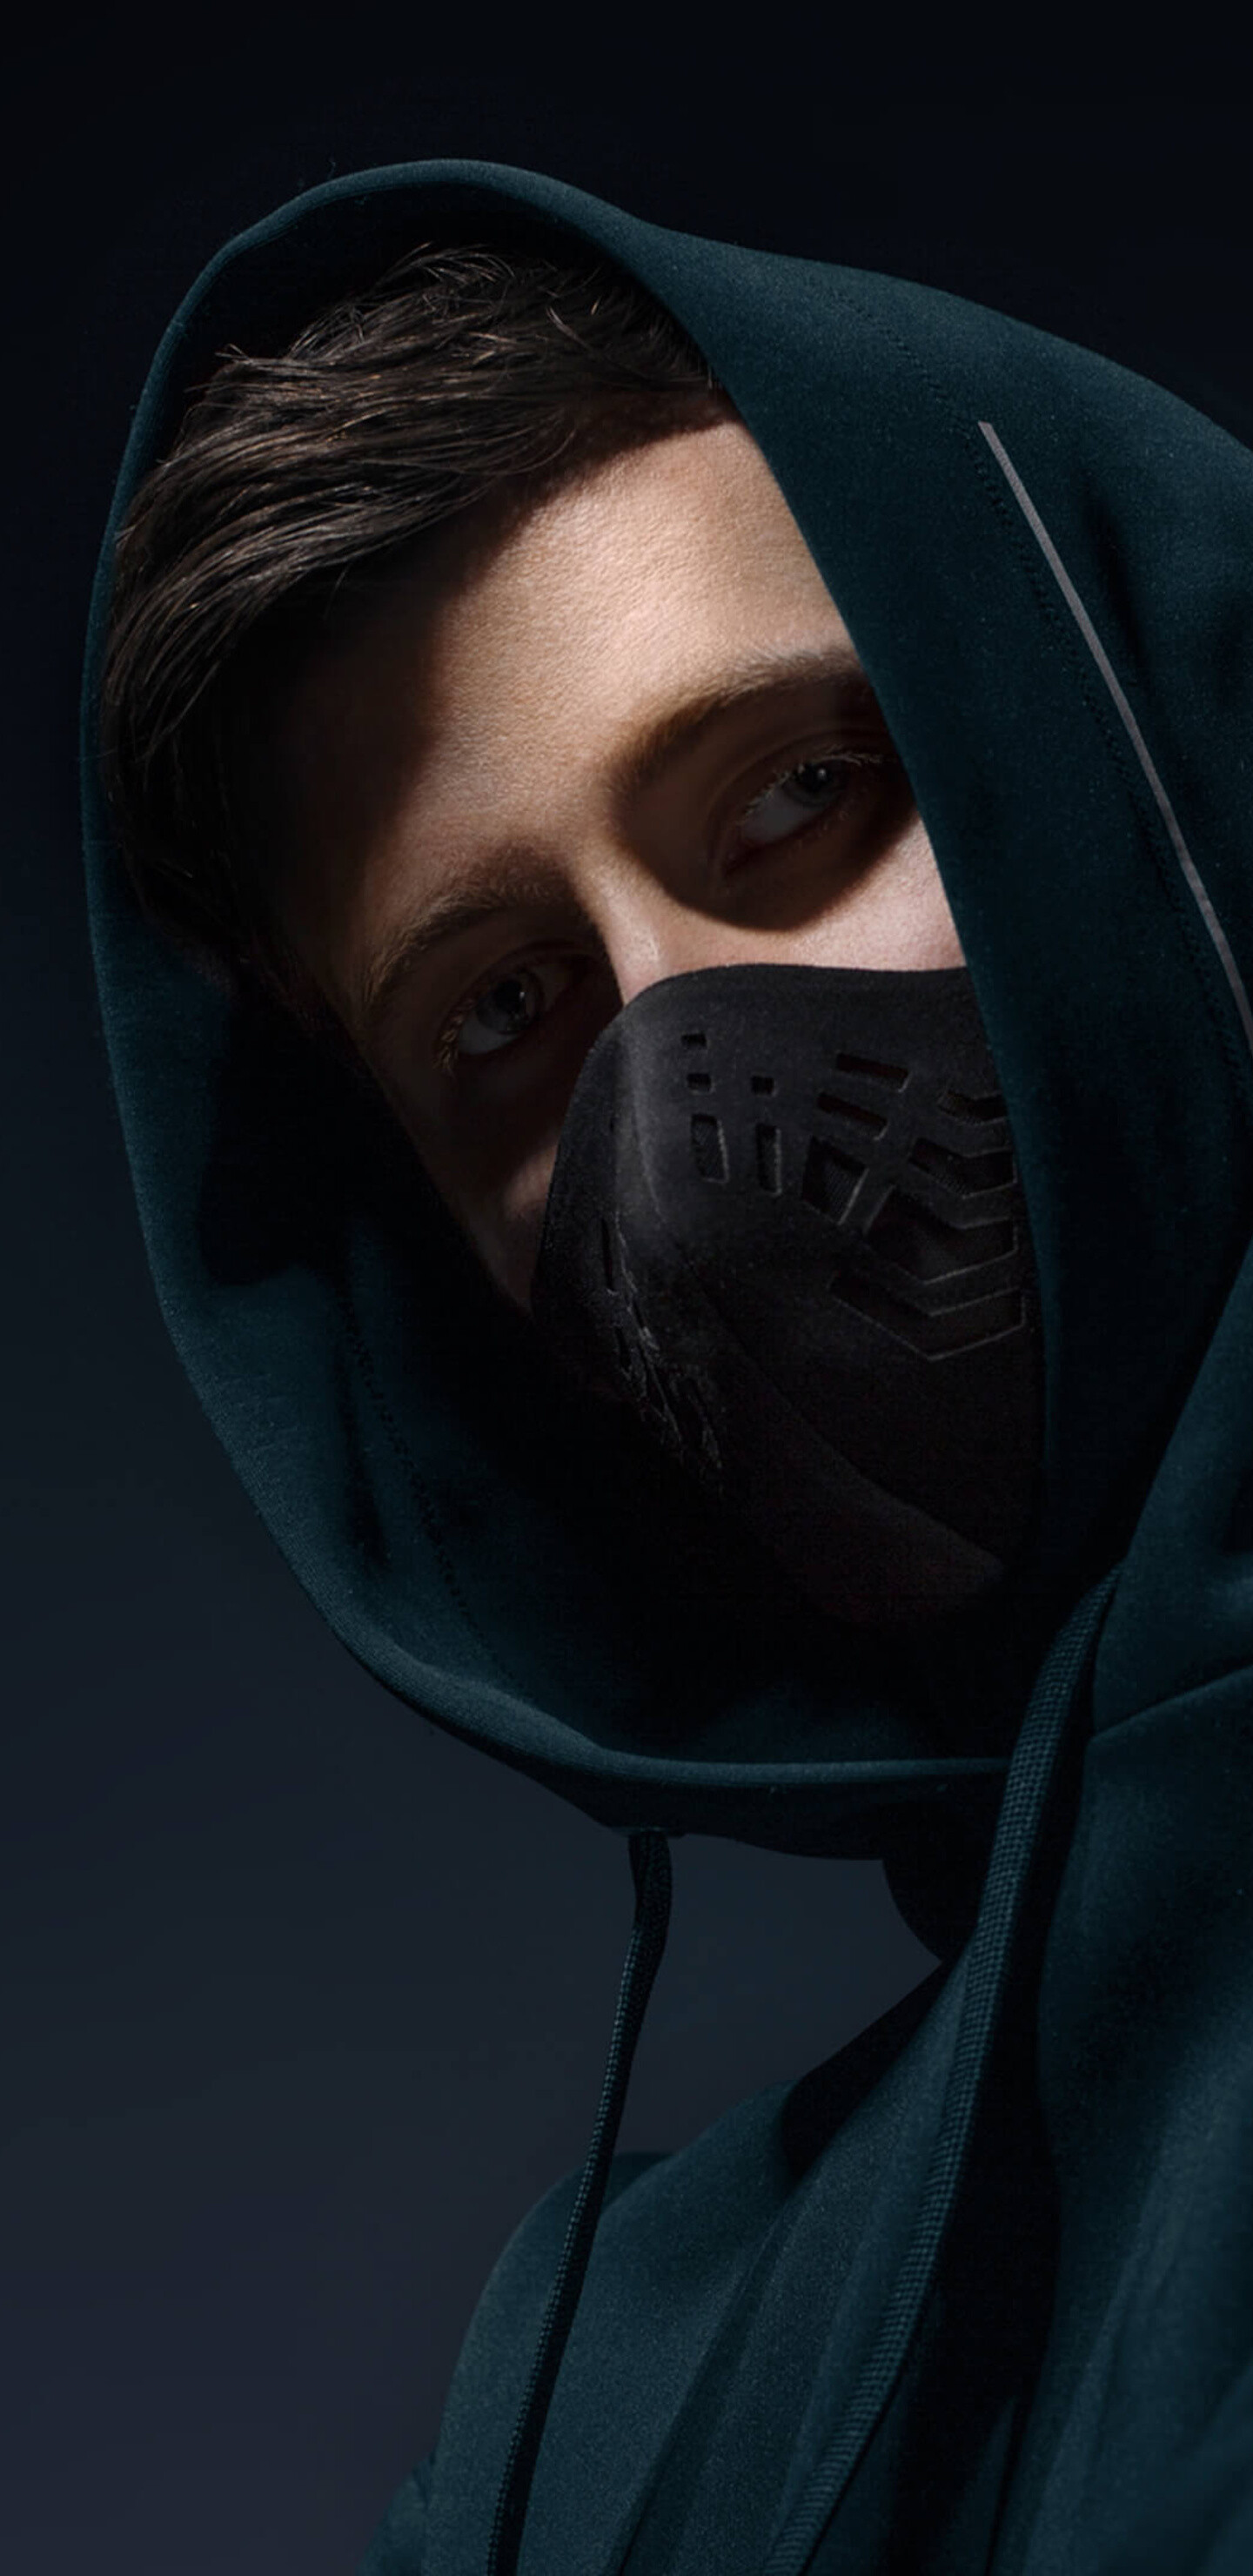 Alan Walker: Best known for the singles “Faded” and "The Spectre". 1440x2960 HD Wallpaper.